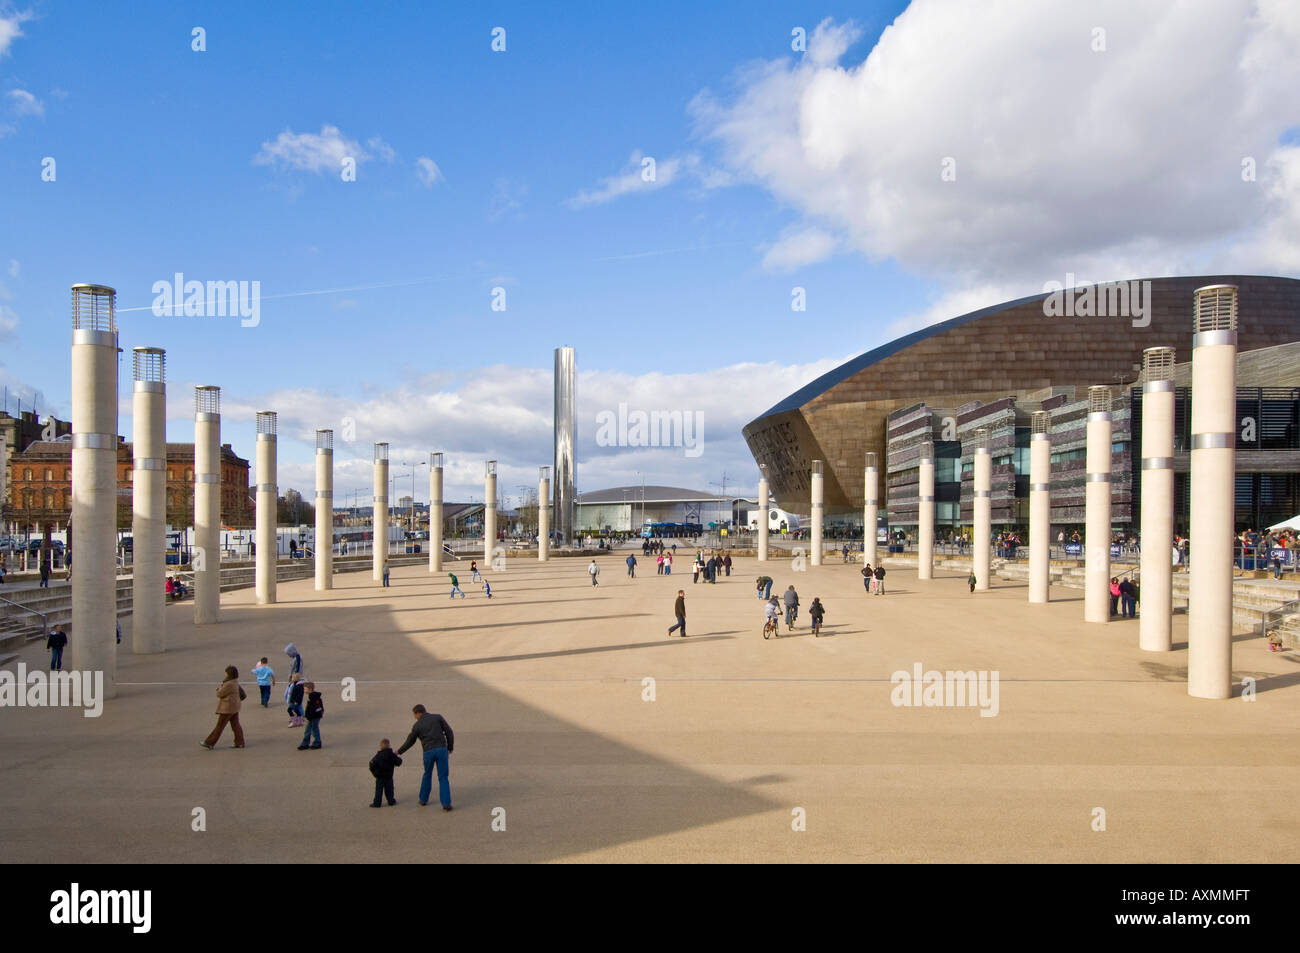 The Wales Millennium Centre and Roald Dahl Plass at the regenerated Cardiff Bay area. Stock Photo